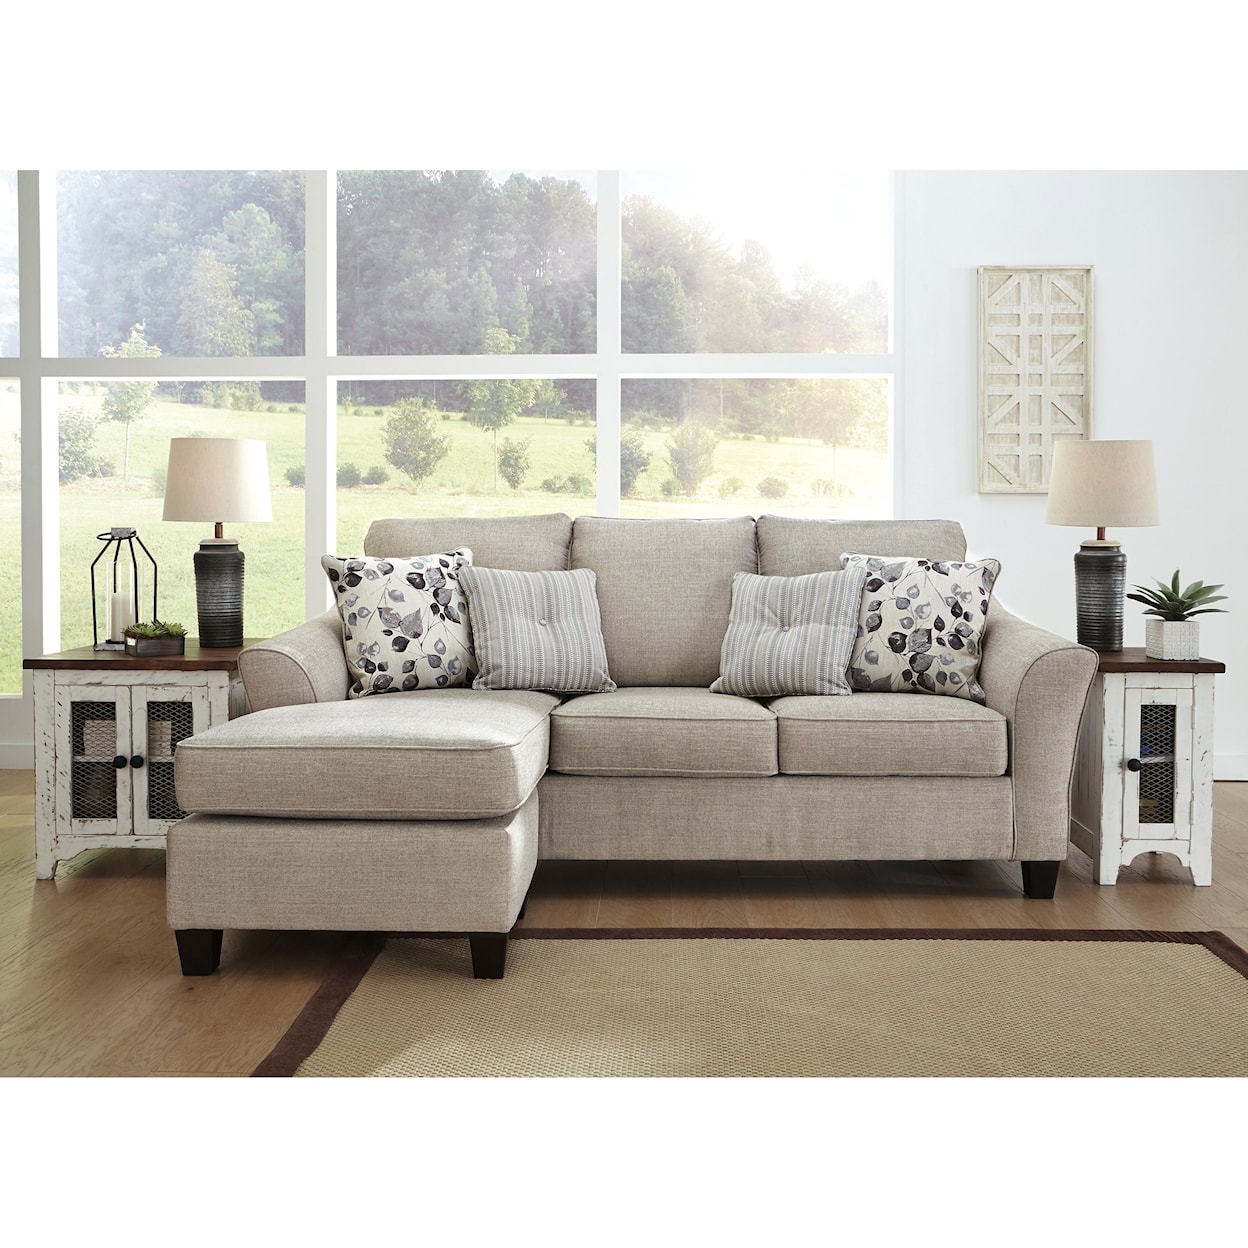 Benchcraft by Ashley Abney Sofa Chaise Queen Sleeper